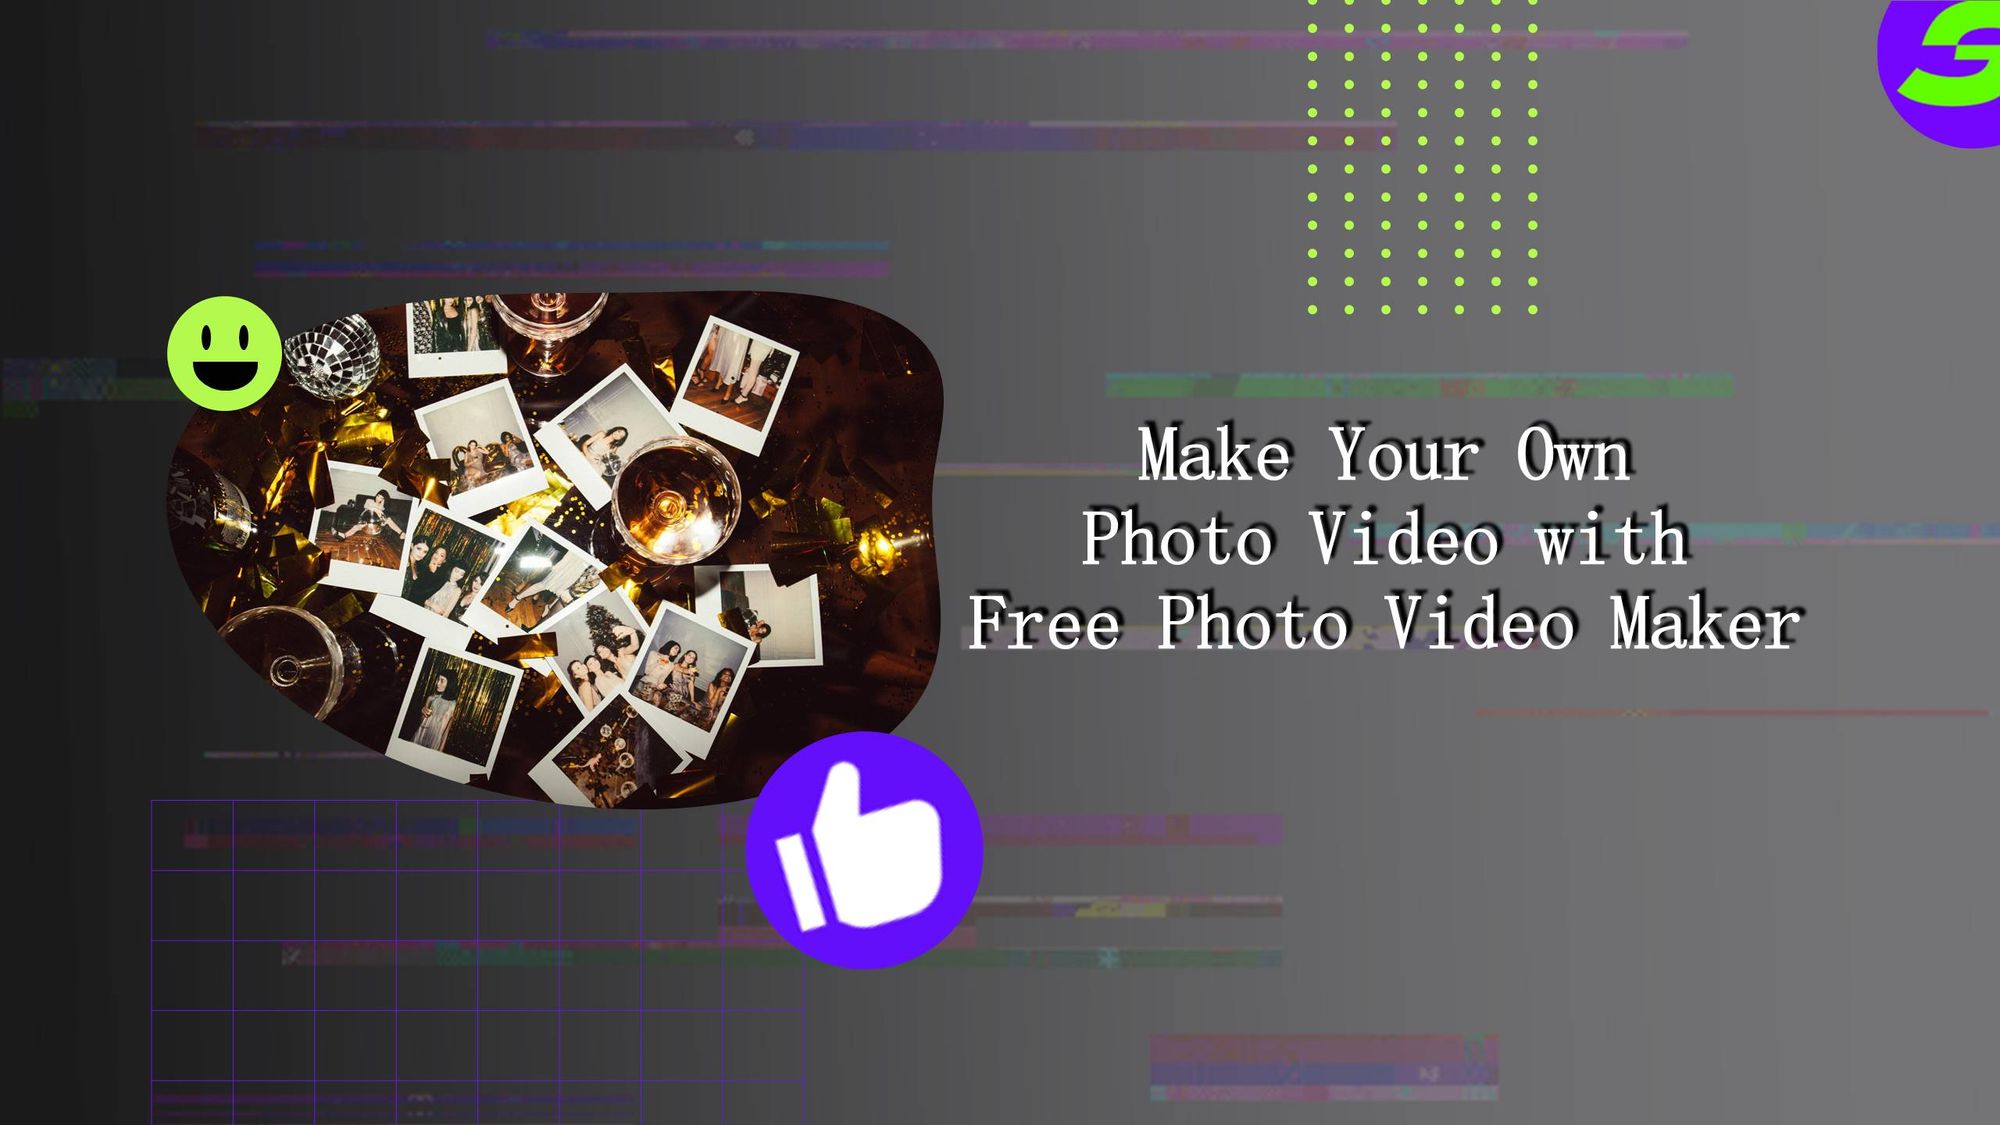 Create Photo Video with Free Photo Video Maker